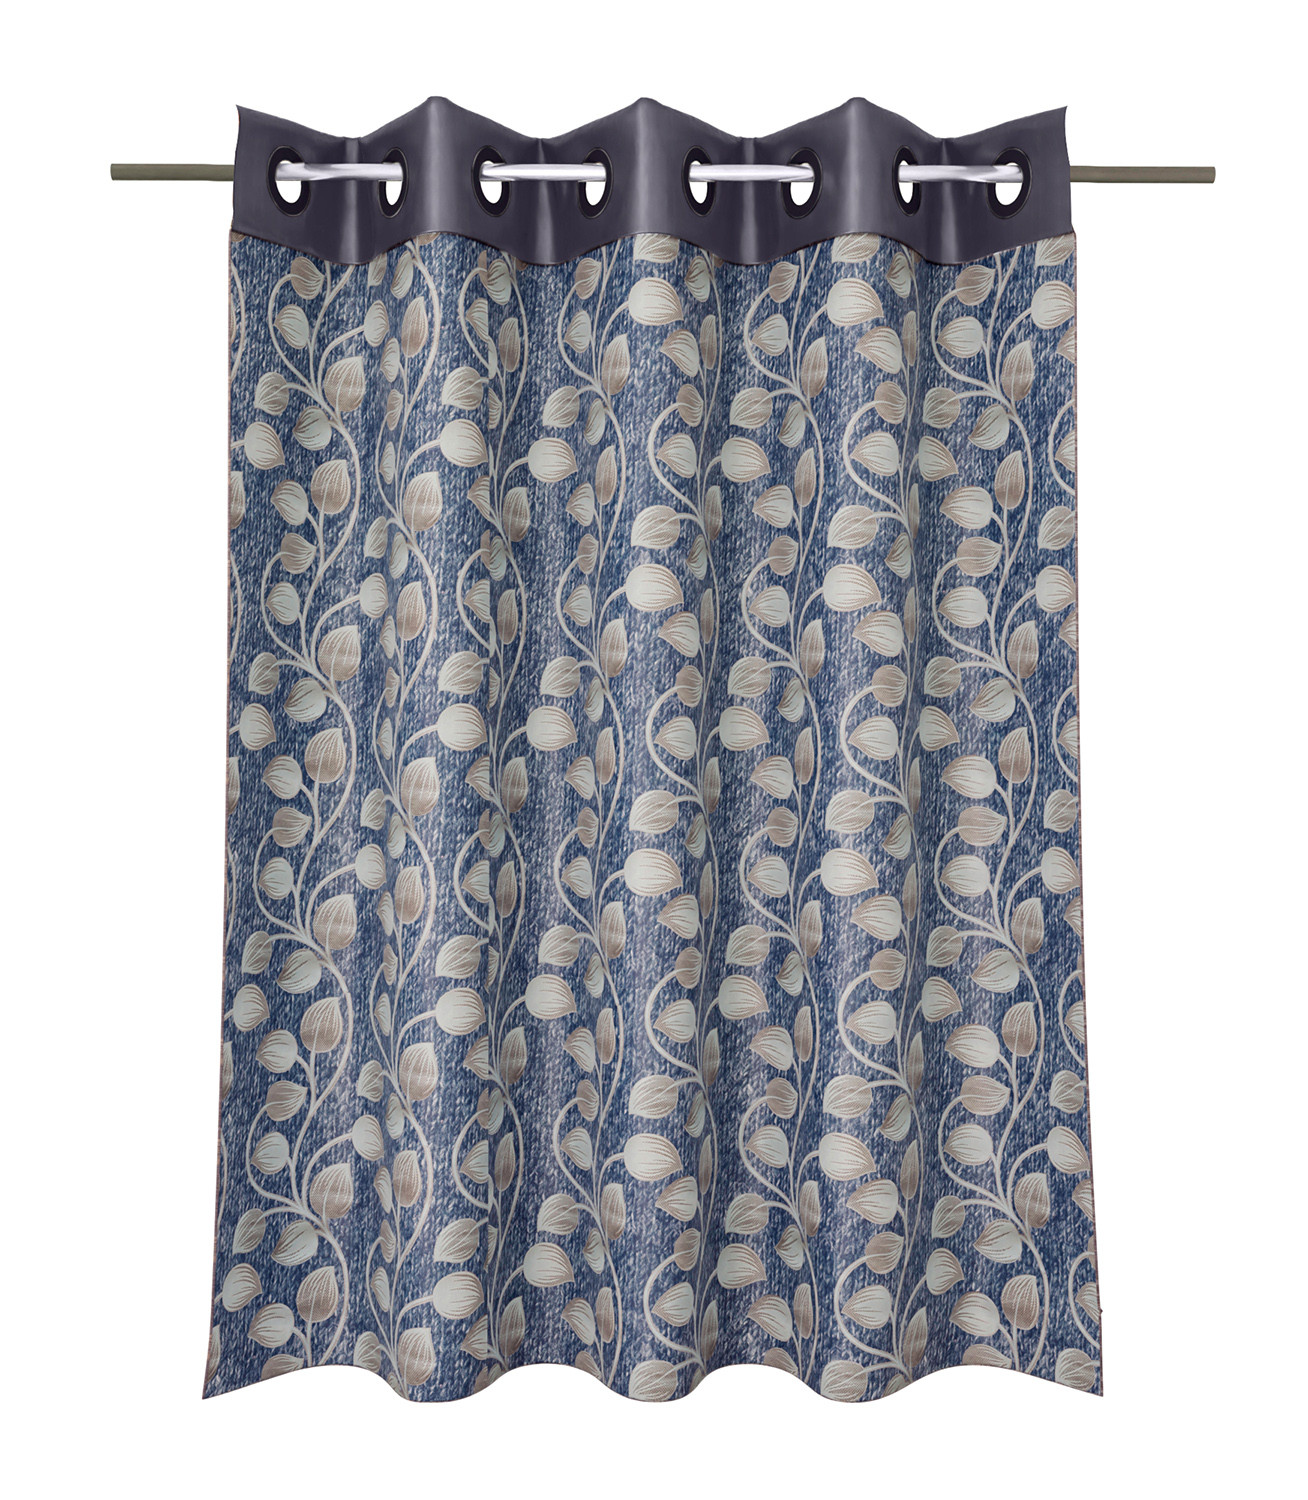 Kuber Industries Silk Decorative 5 Feet Window Curtain | Leaf Print Darkening Blackout | Drapes Curtain With 8 Eyelet For Home & Office (Blue)